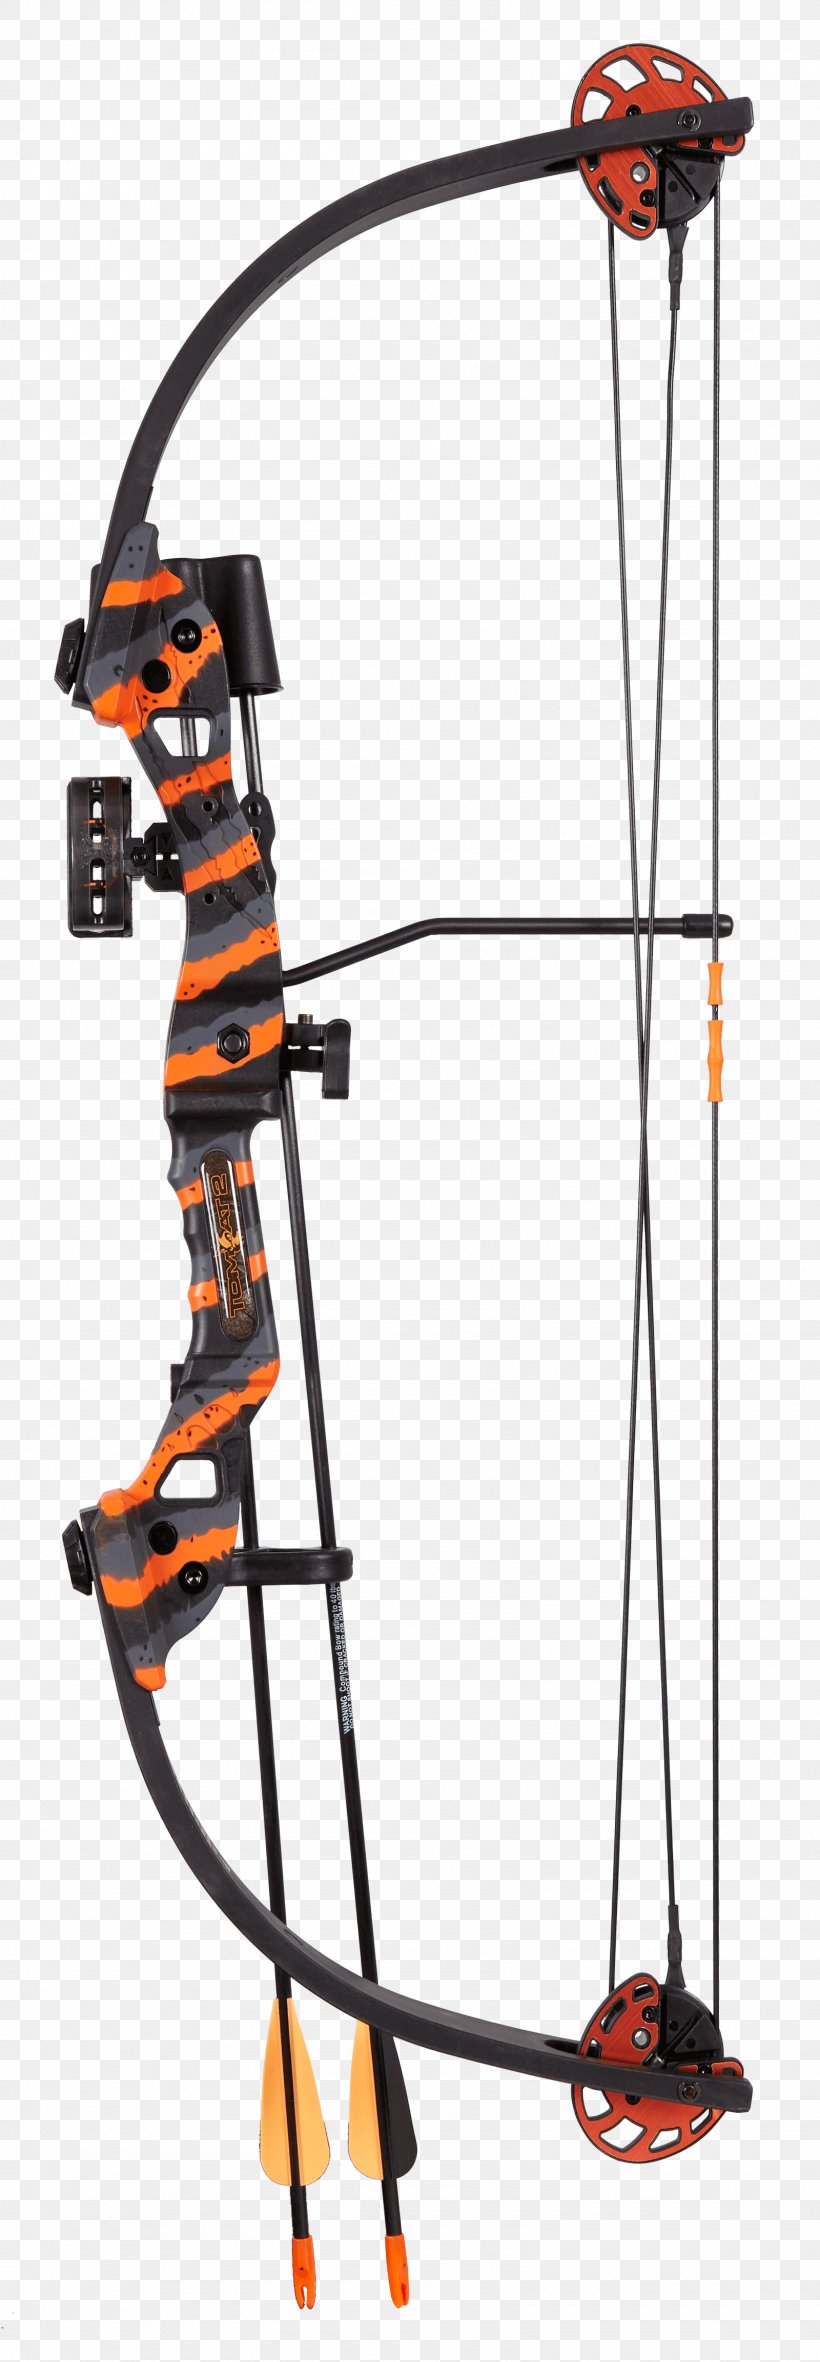 Compound Bows Bow And Arrow Archery Quiver, PNG, 1600x4610px, Compound Bows, Archery, Bear Archery, Bow, Bow And Arrow Download Free